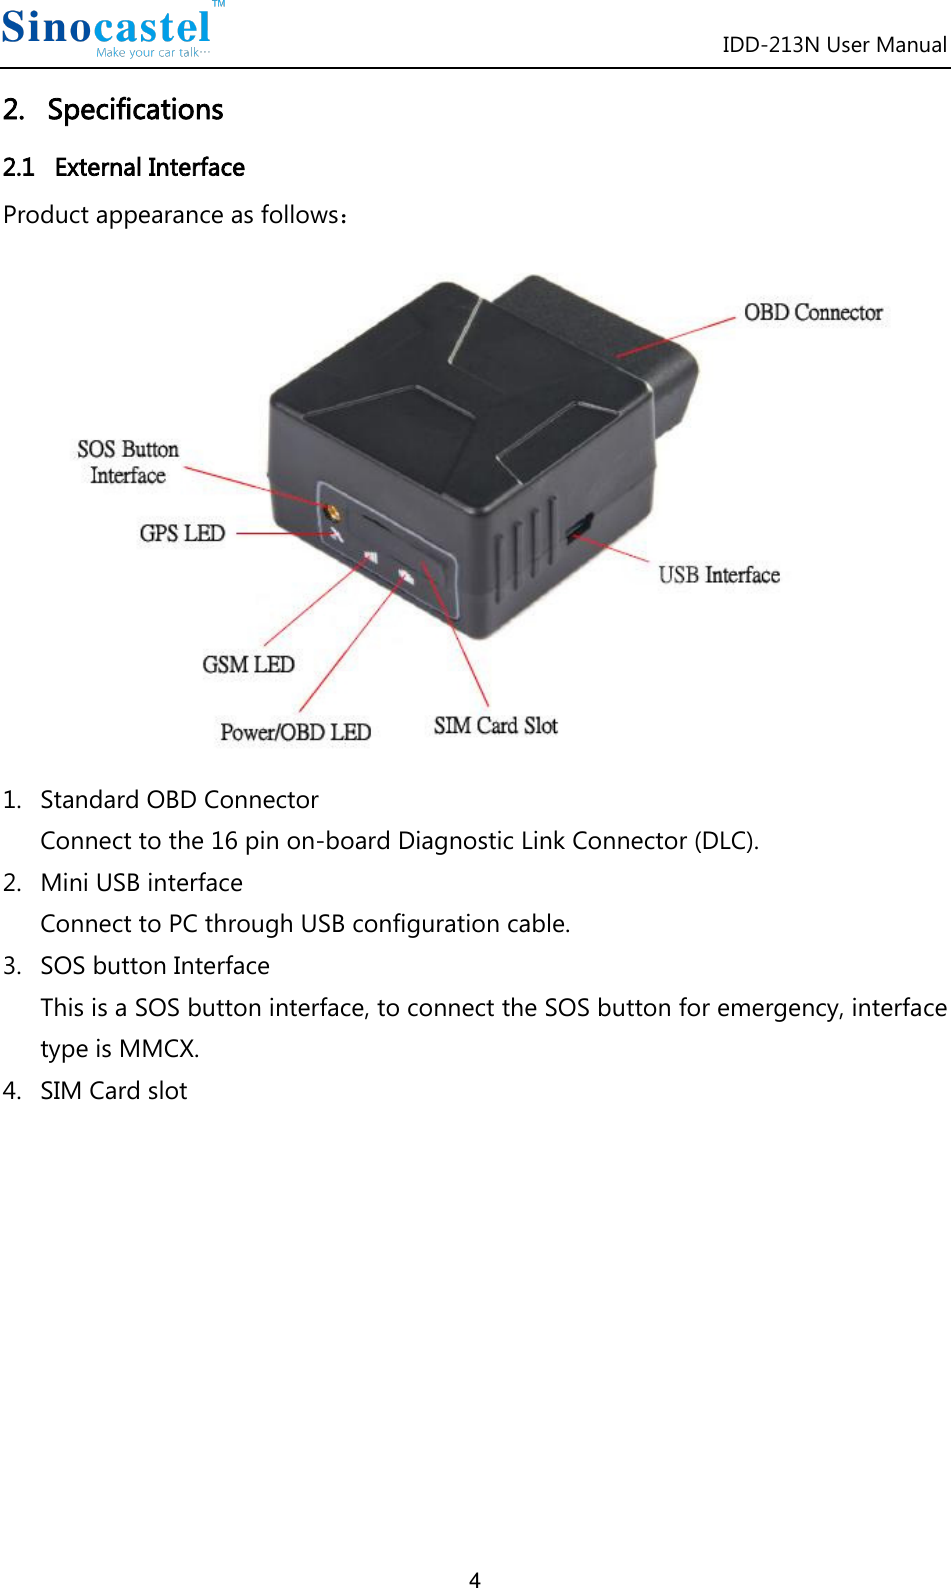 IDD-213N User Manual 4 2.   Specifications 2.1   External Interface Product appearance as follows：  1. Standard OBD Connector Connect to the 16 pin on-board Diagnostic Link Connector (DLC). 2. Mini USB interface Connect to PC through USB configuration cable. 3. SOS button Interface This is a SOS button interface, to connect the SOS button for emergency, interface type is MMCX. 4. SIM Card slot           